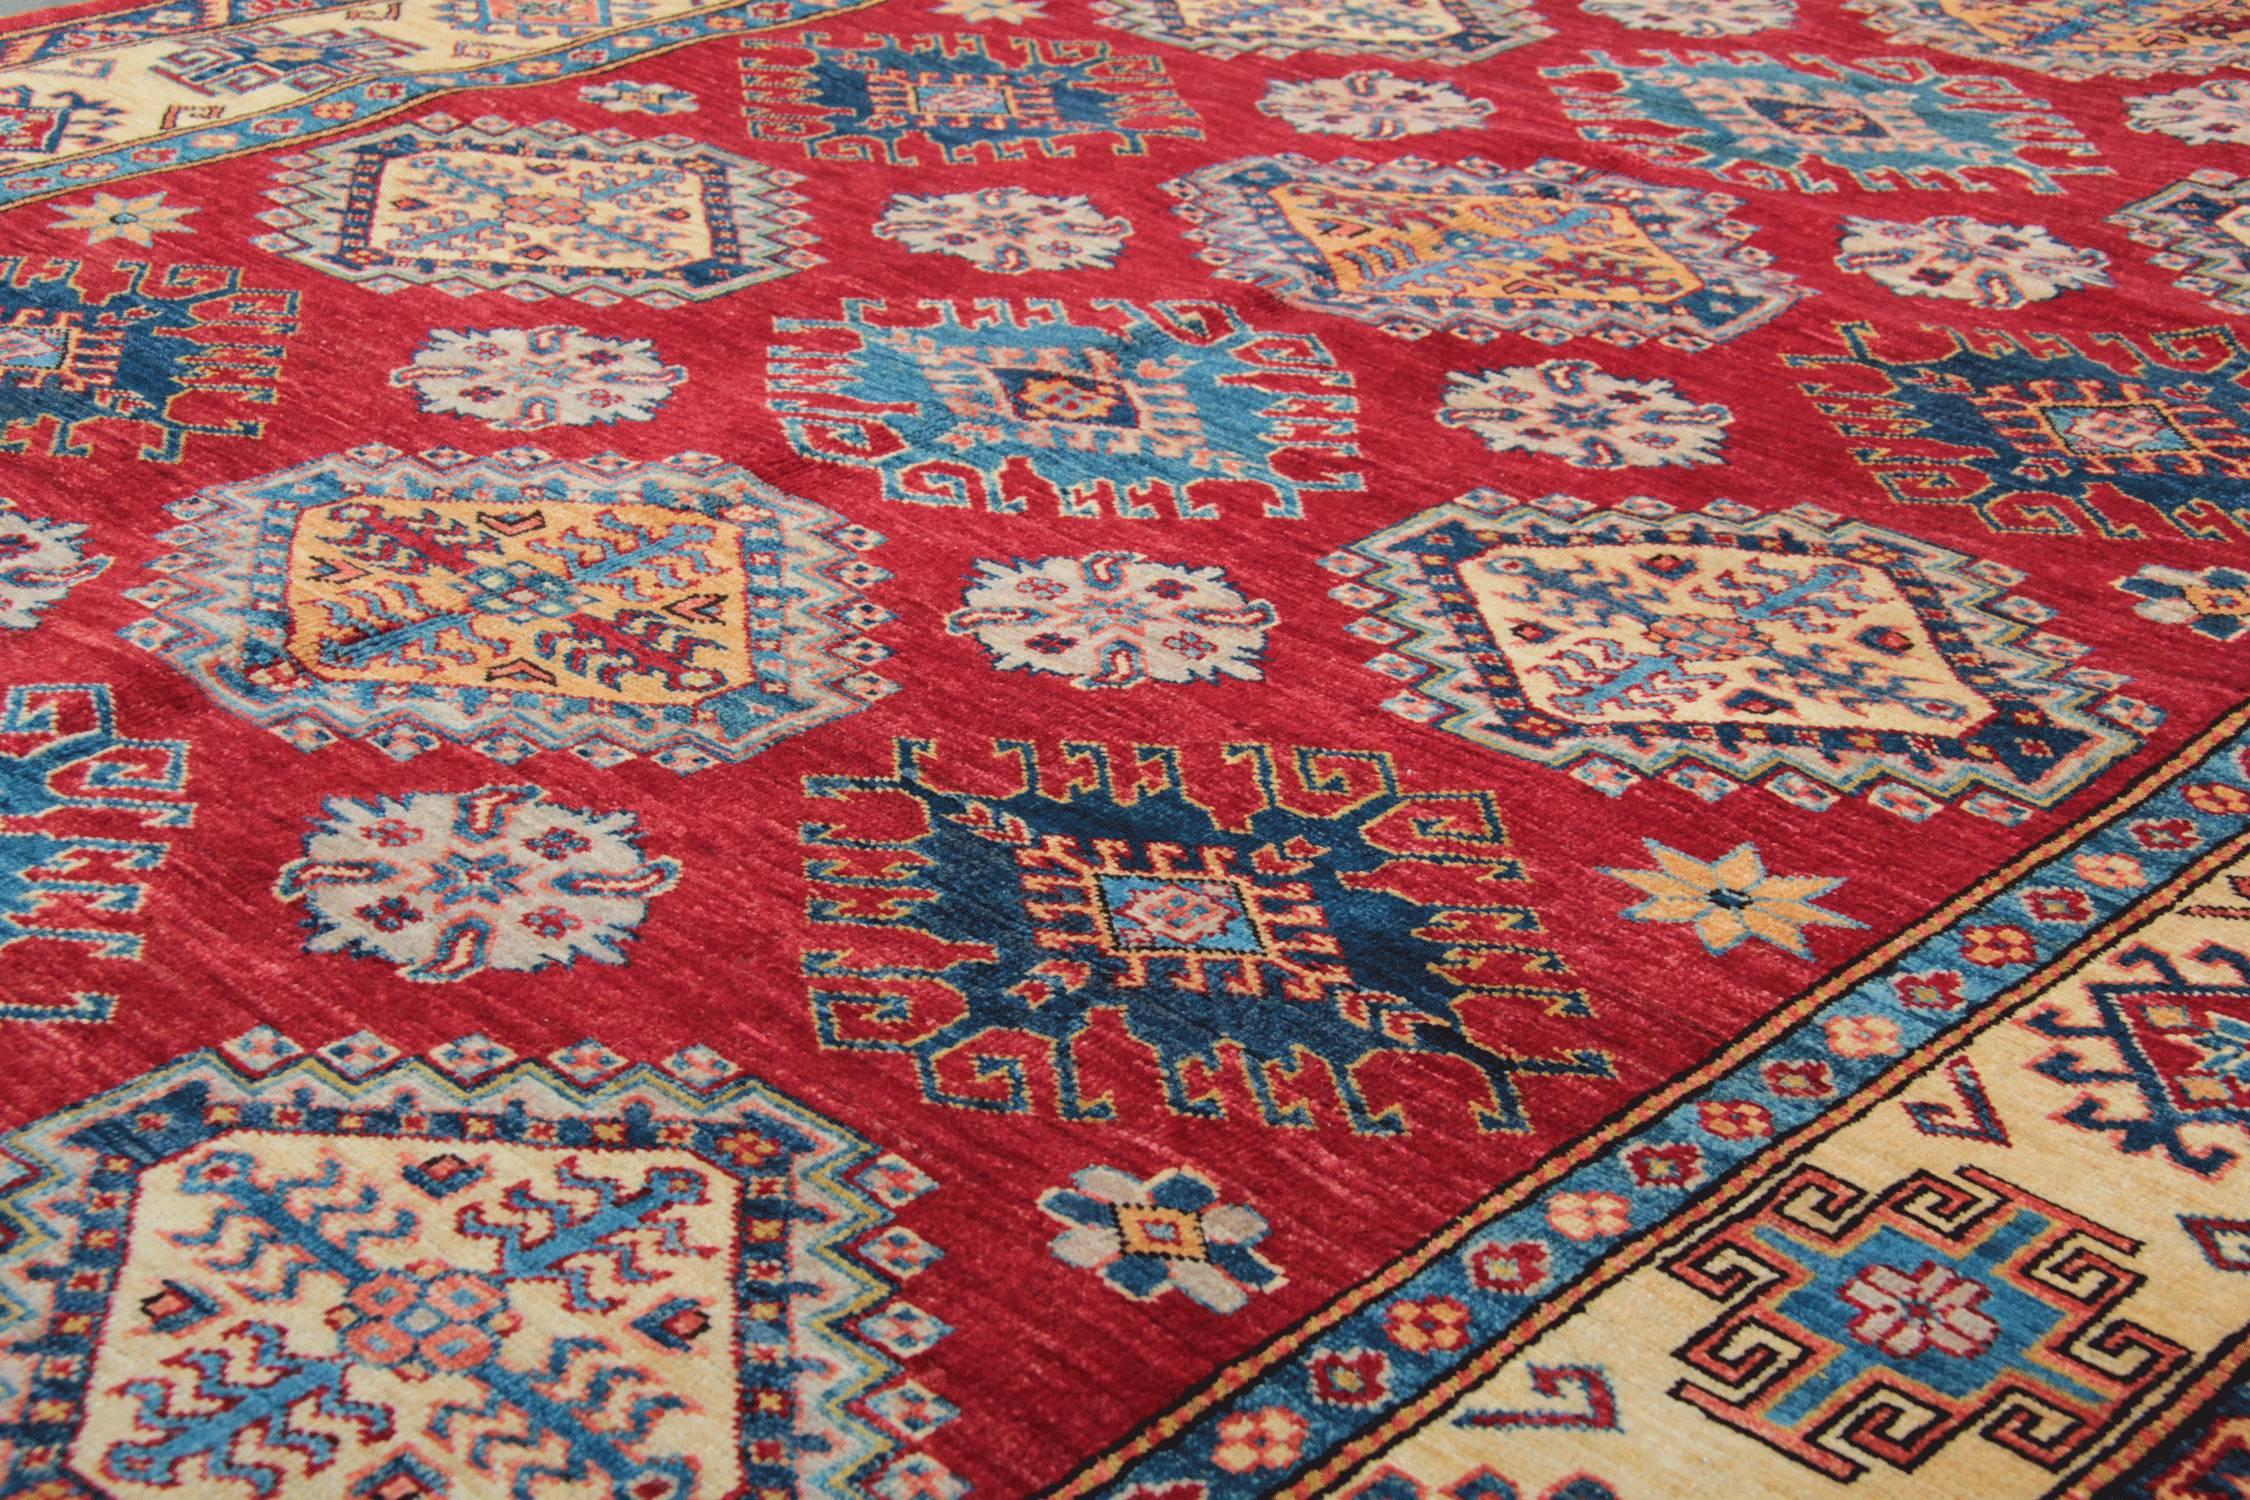 This is an example of a handwoven rug, which is featuring designs from the Kazak region. Northern Persia is famous with its traditional rugs design. The Afghan weavers used top quality wool and cotton for the production of this red rug. These tribal